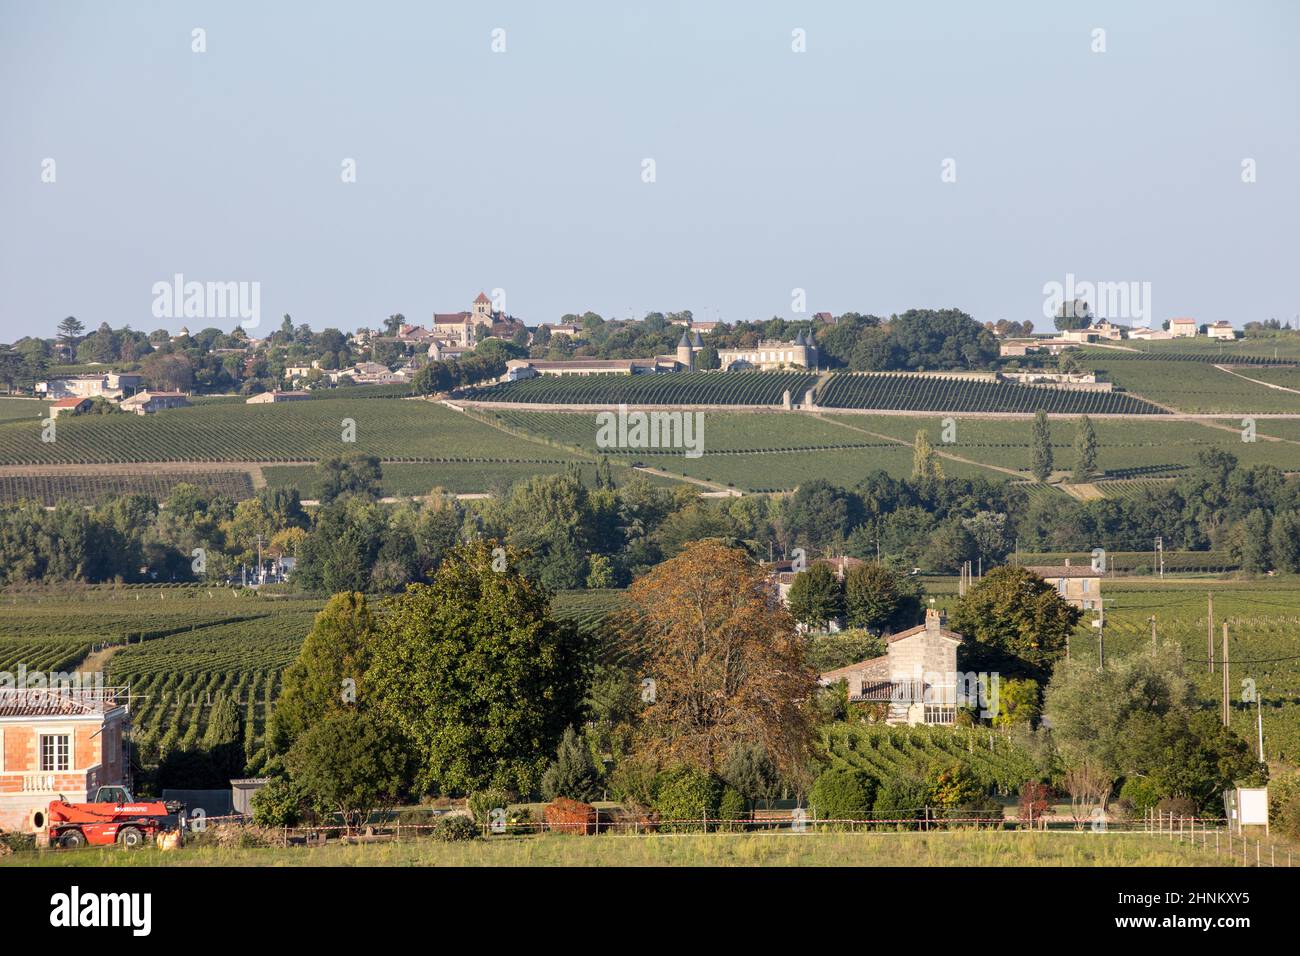 Ripe red  grapes on rows of vines in a vienyard before the wine harvest in Saint Emilion region. France Stock Photo